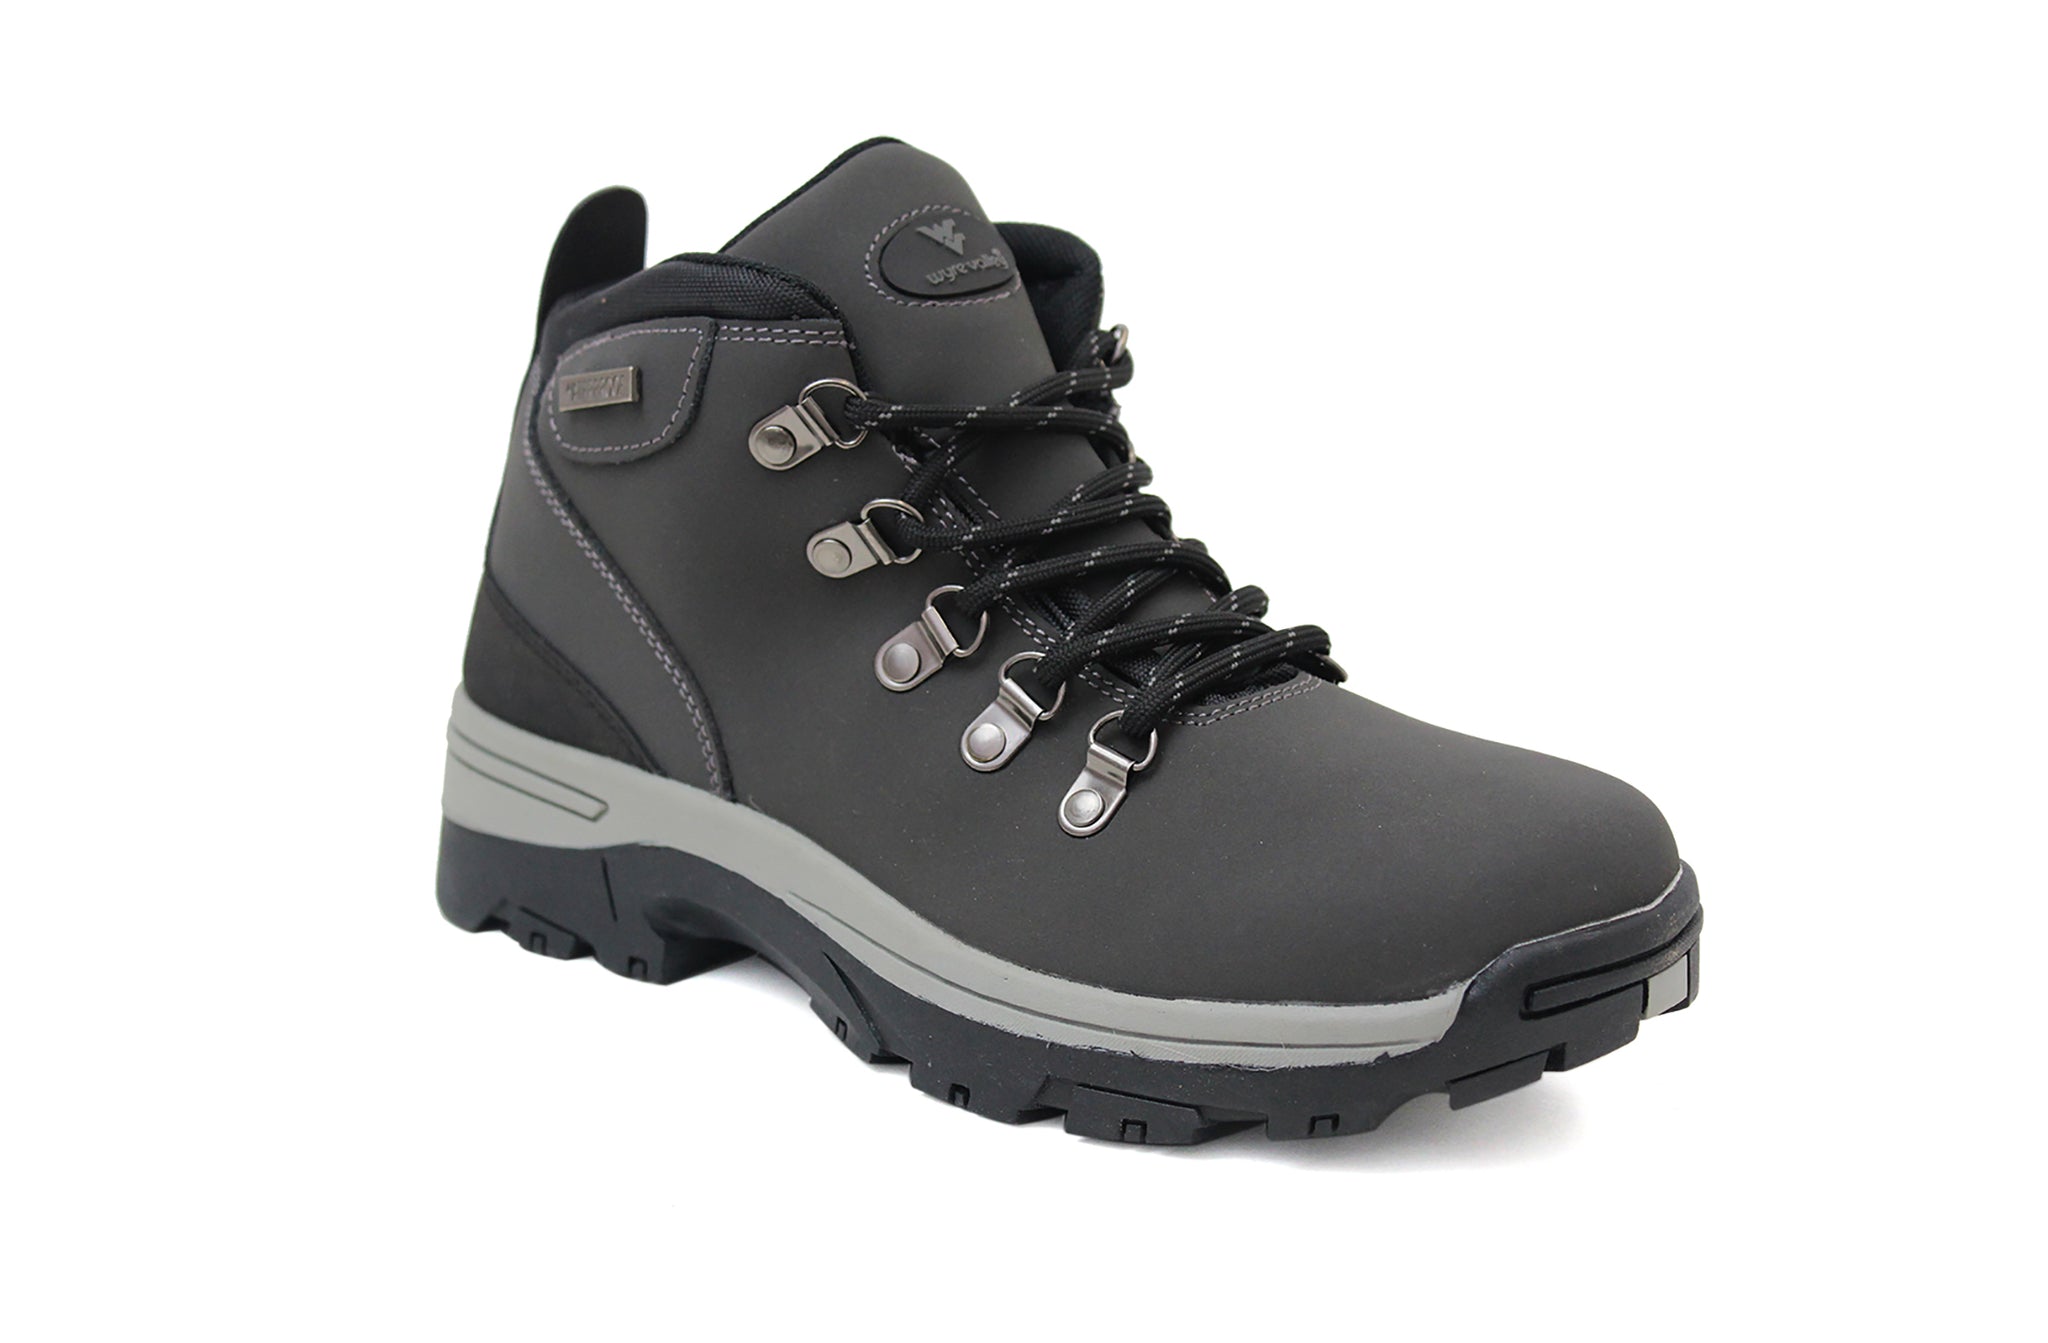 Wyre Valley Womens Grey Waterproof Leather Lace Up Memory Foam Hiking Boots